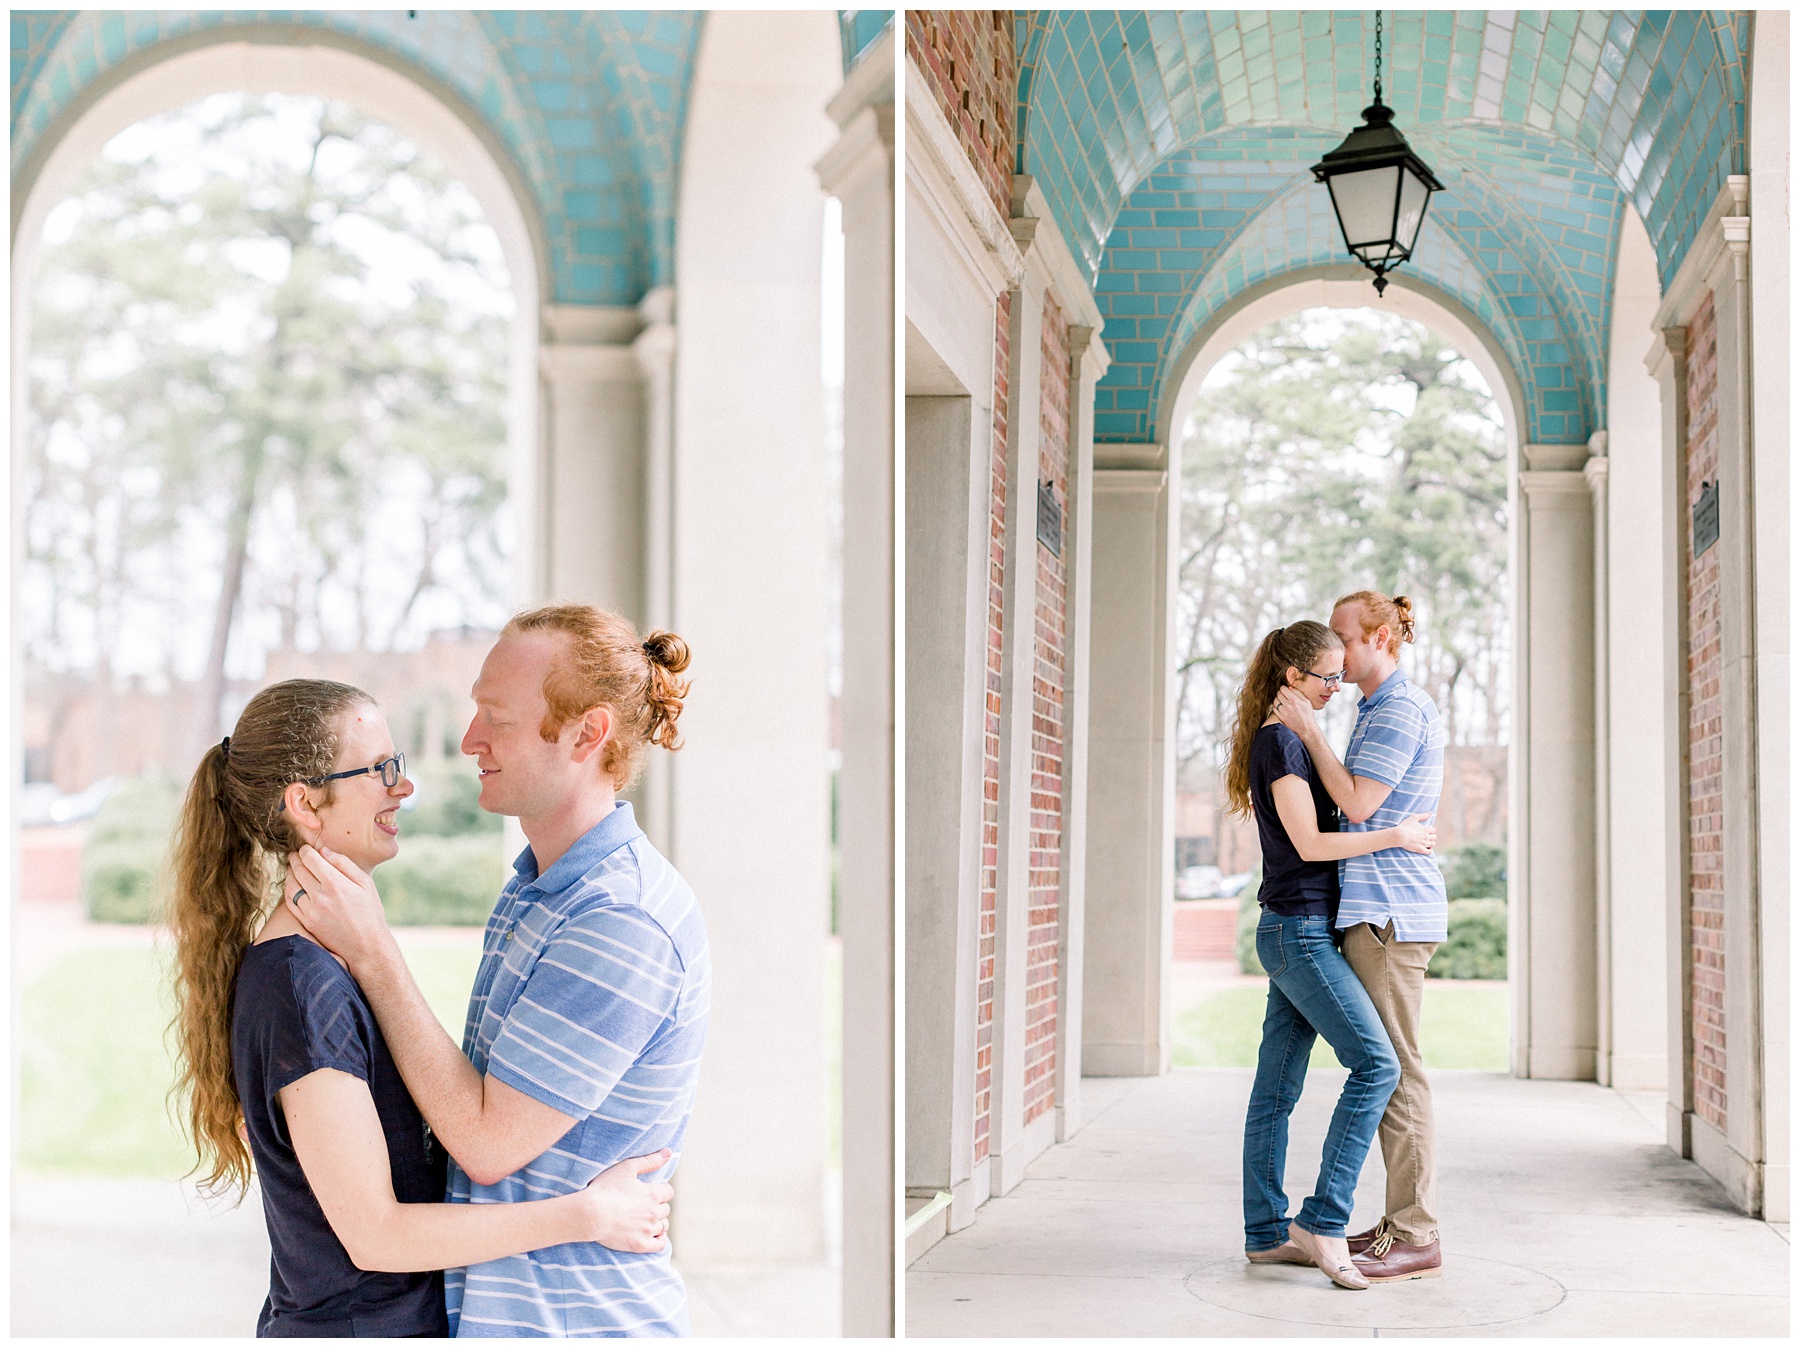 Spring Engagement Session at UNC Chapel Hill Bell Tower. North Carolina Wedding Photographer.